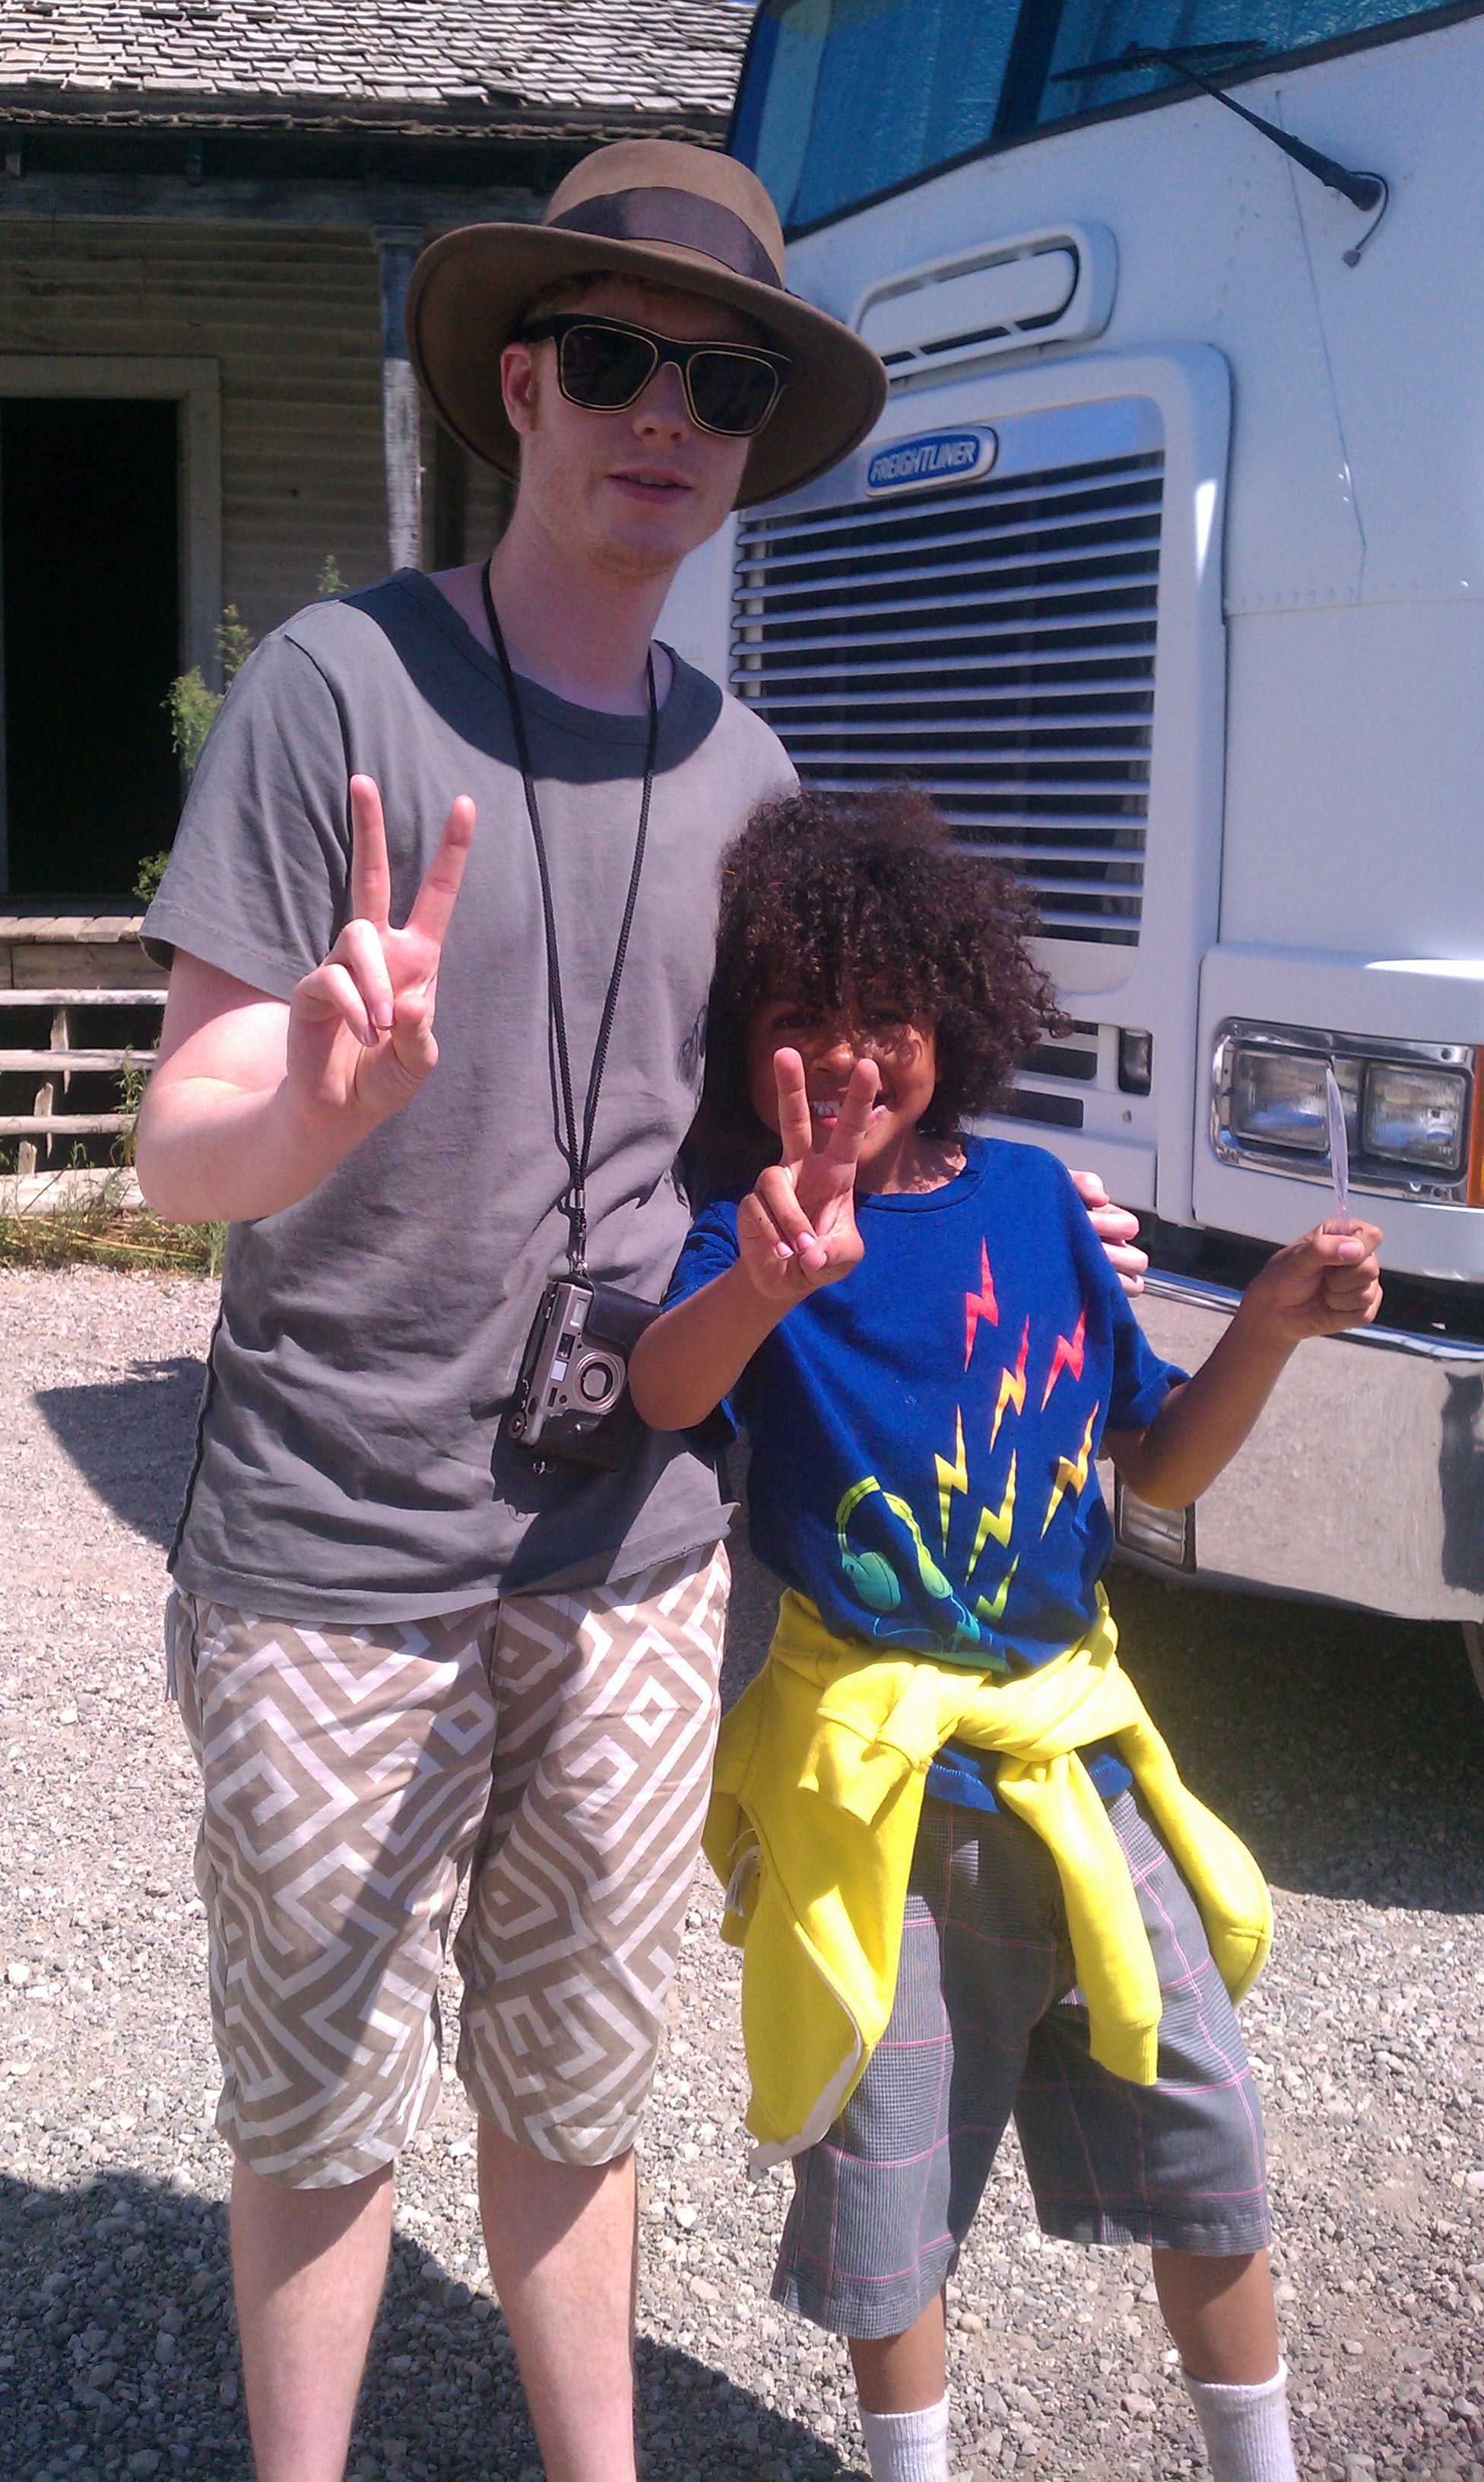 Nick with D.A. Wallach of the indie band CHESTER FRENCH for the music video Glowing directed by TYLER, THE CREATOR